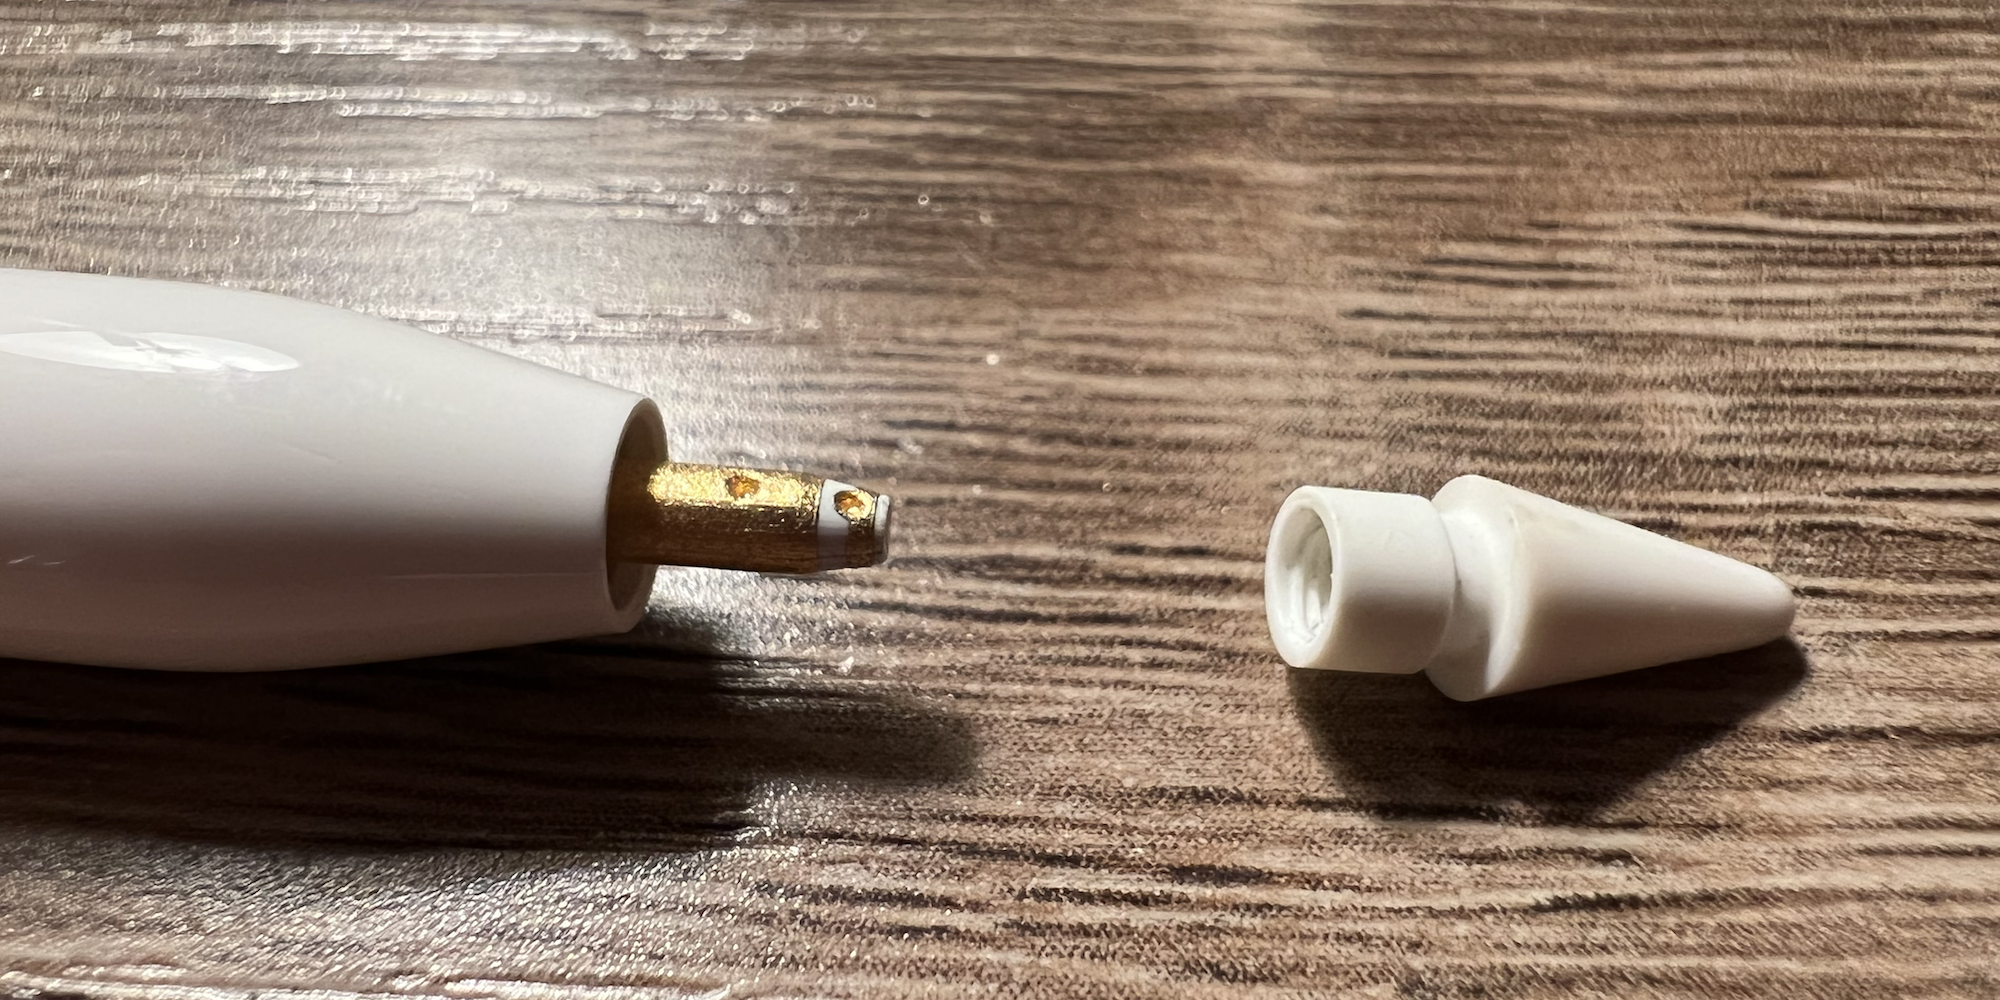 An Apple Pencil with the tip unscrewed and removed, exposing the metal underneath.